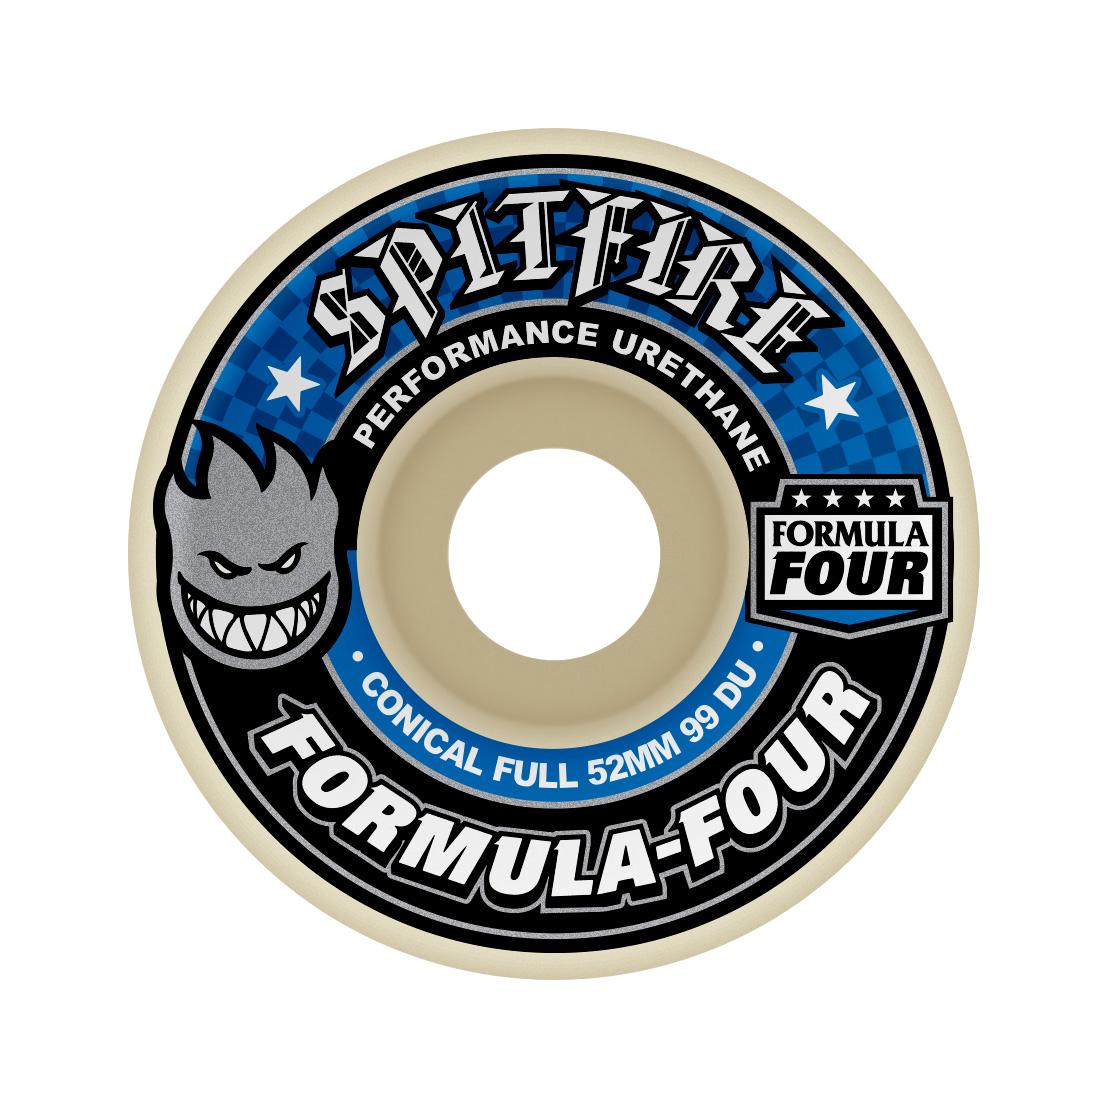 Spitfire F4 99a Conical Full 52mm - Venue Skateboards